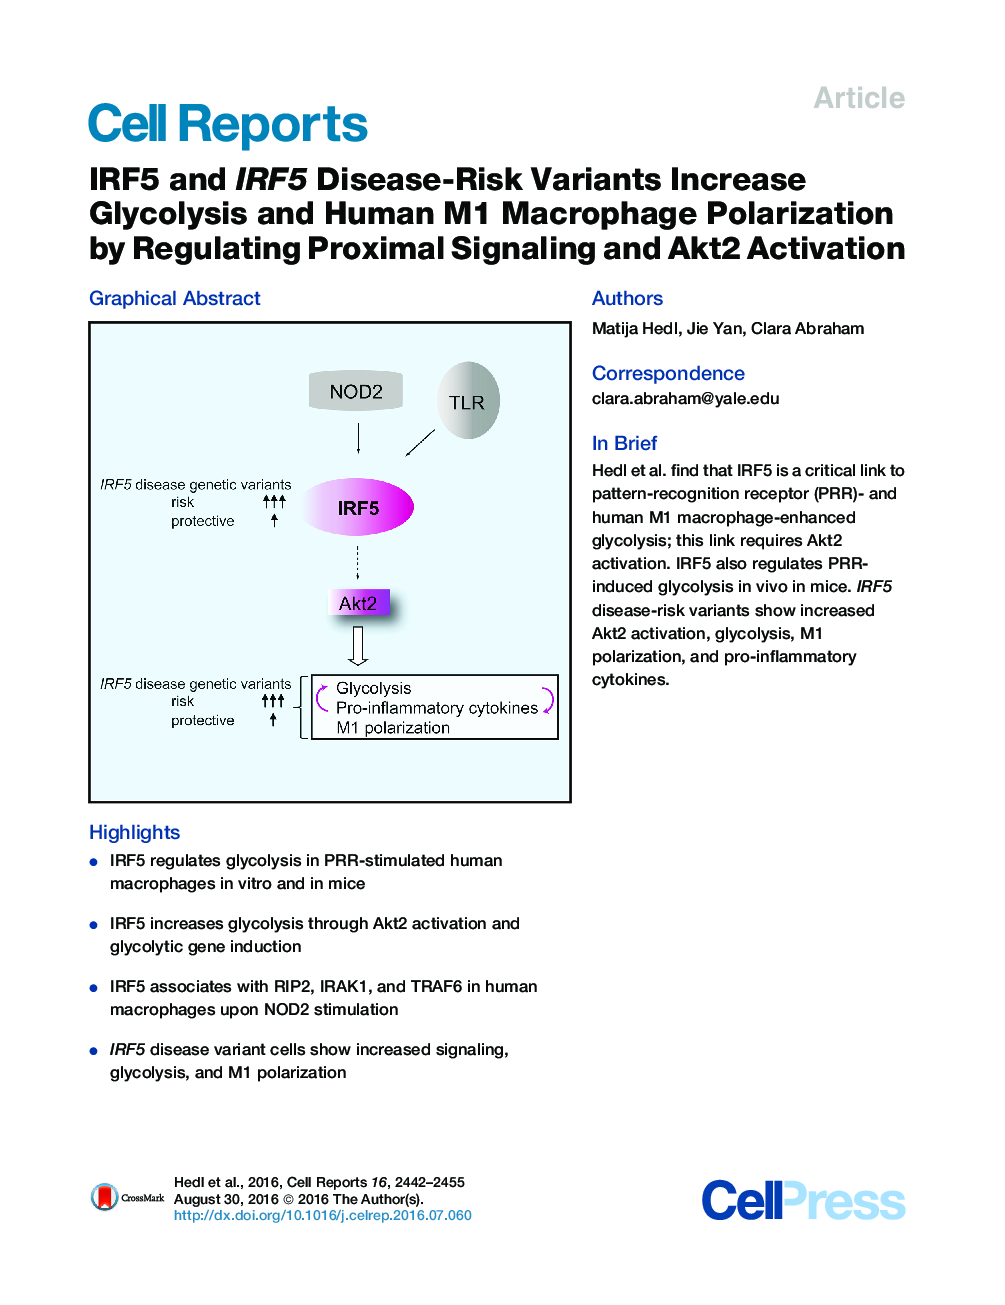 IRF5 and IRF5 Disease-Risk Variants Increase Glycolysis and Human M1 Macrophage Polarization by Regulating Proximal Signaling and Akt2 Activation